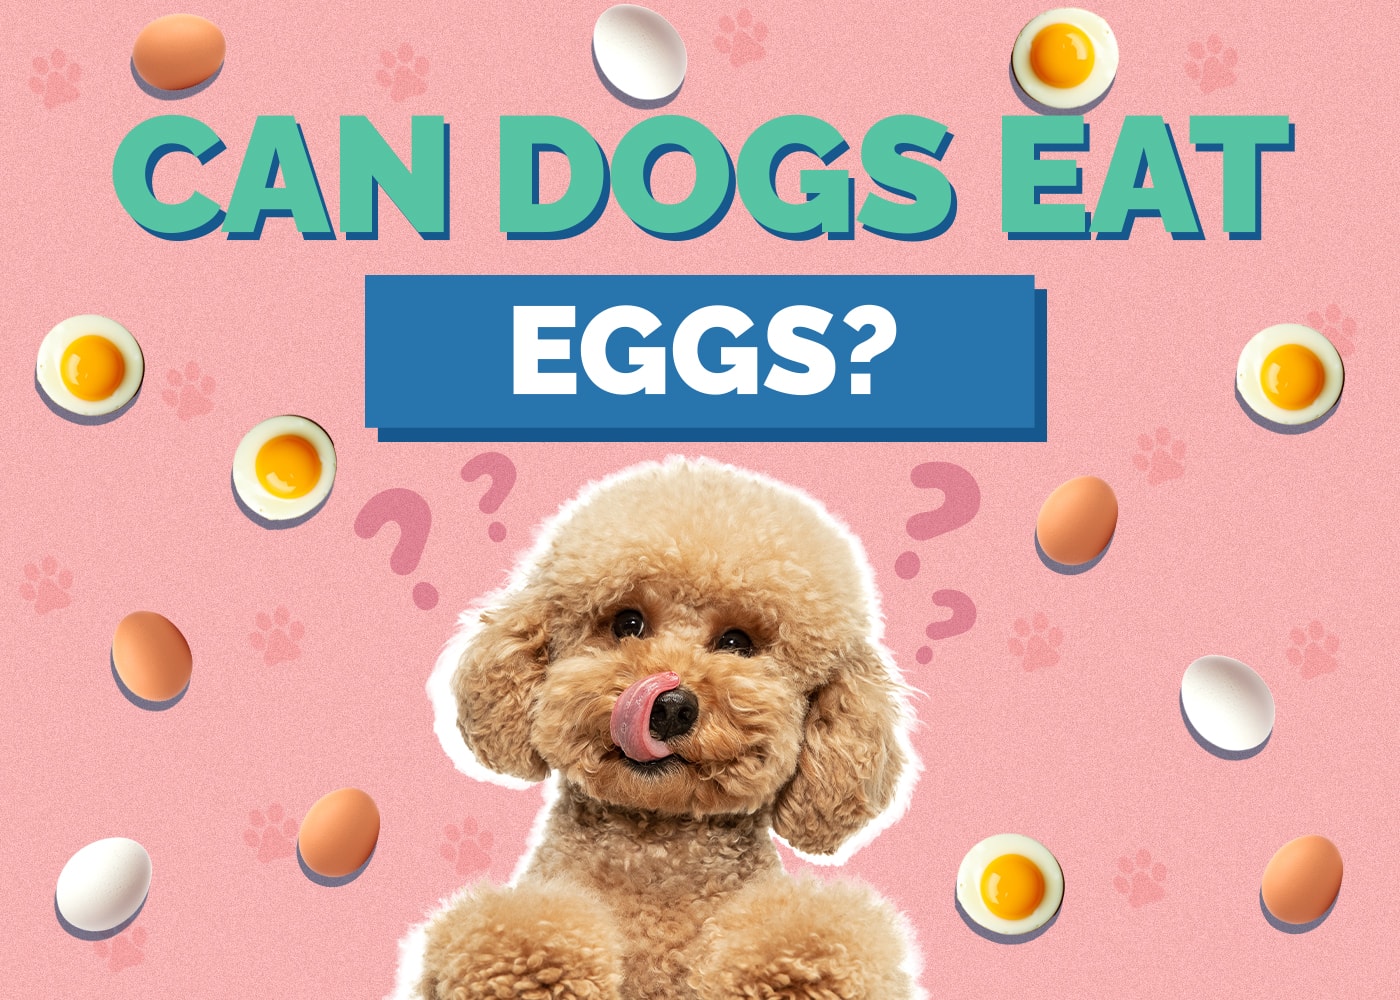 Can Dogs Eat eggs